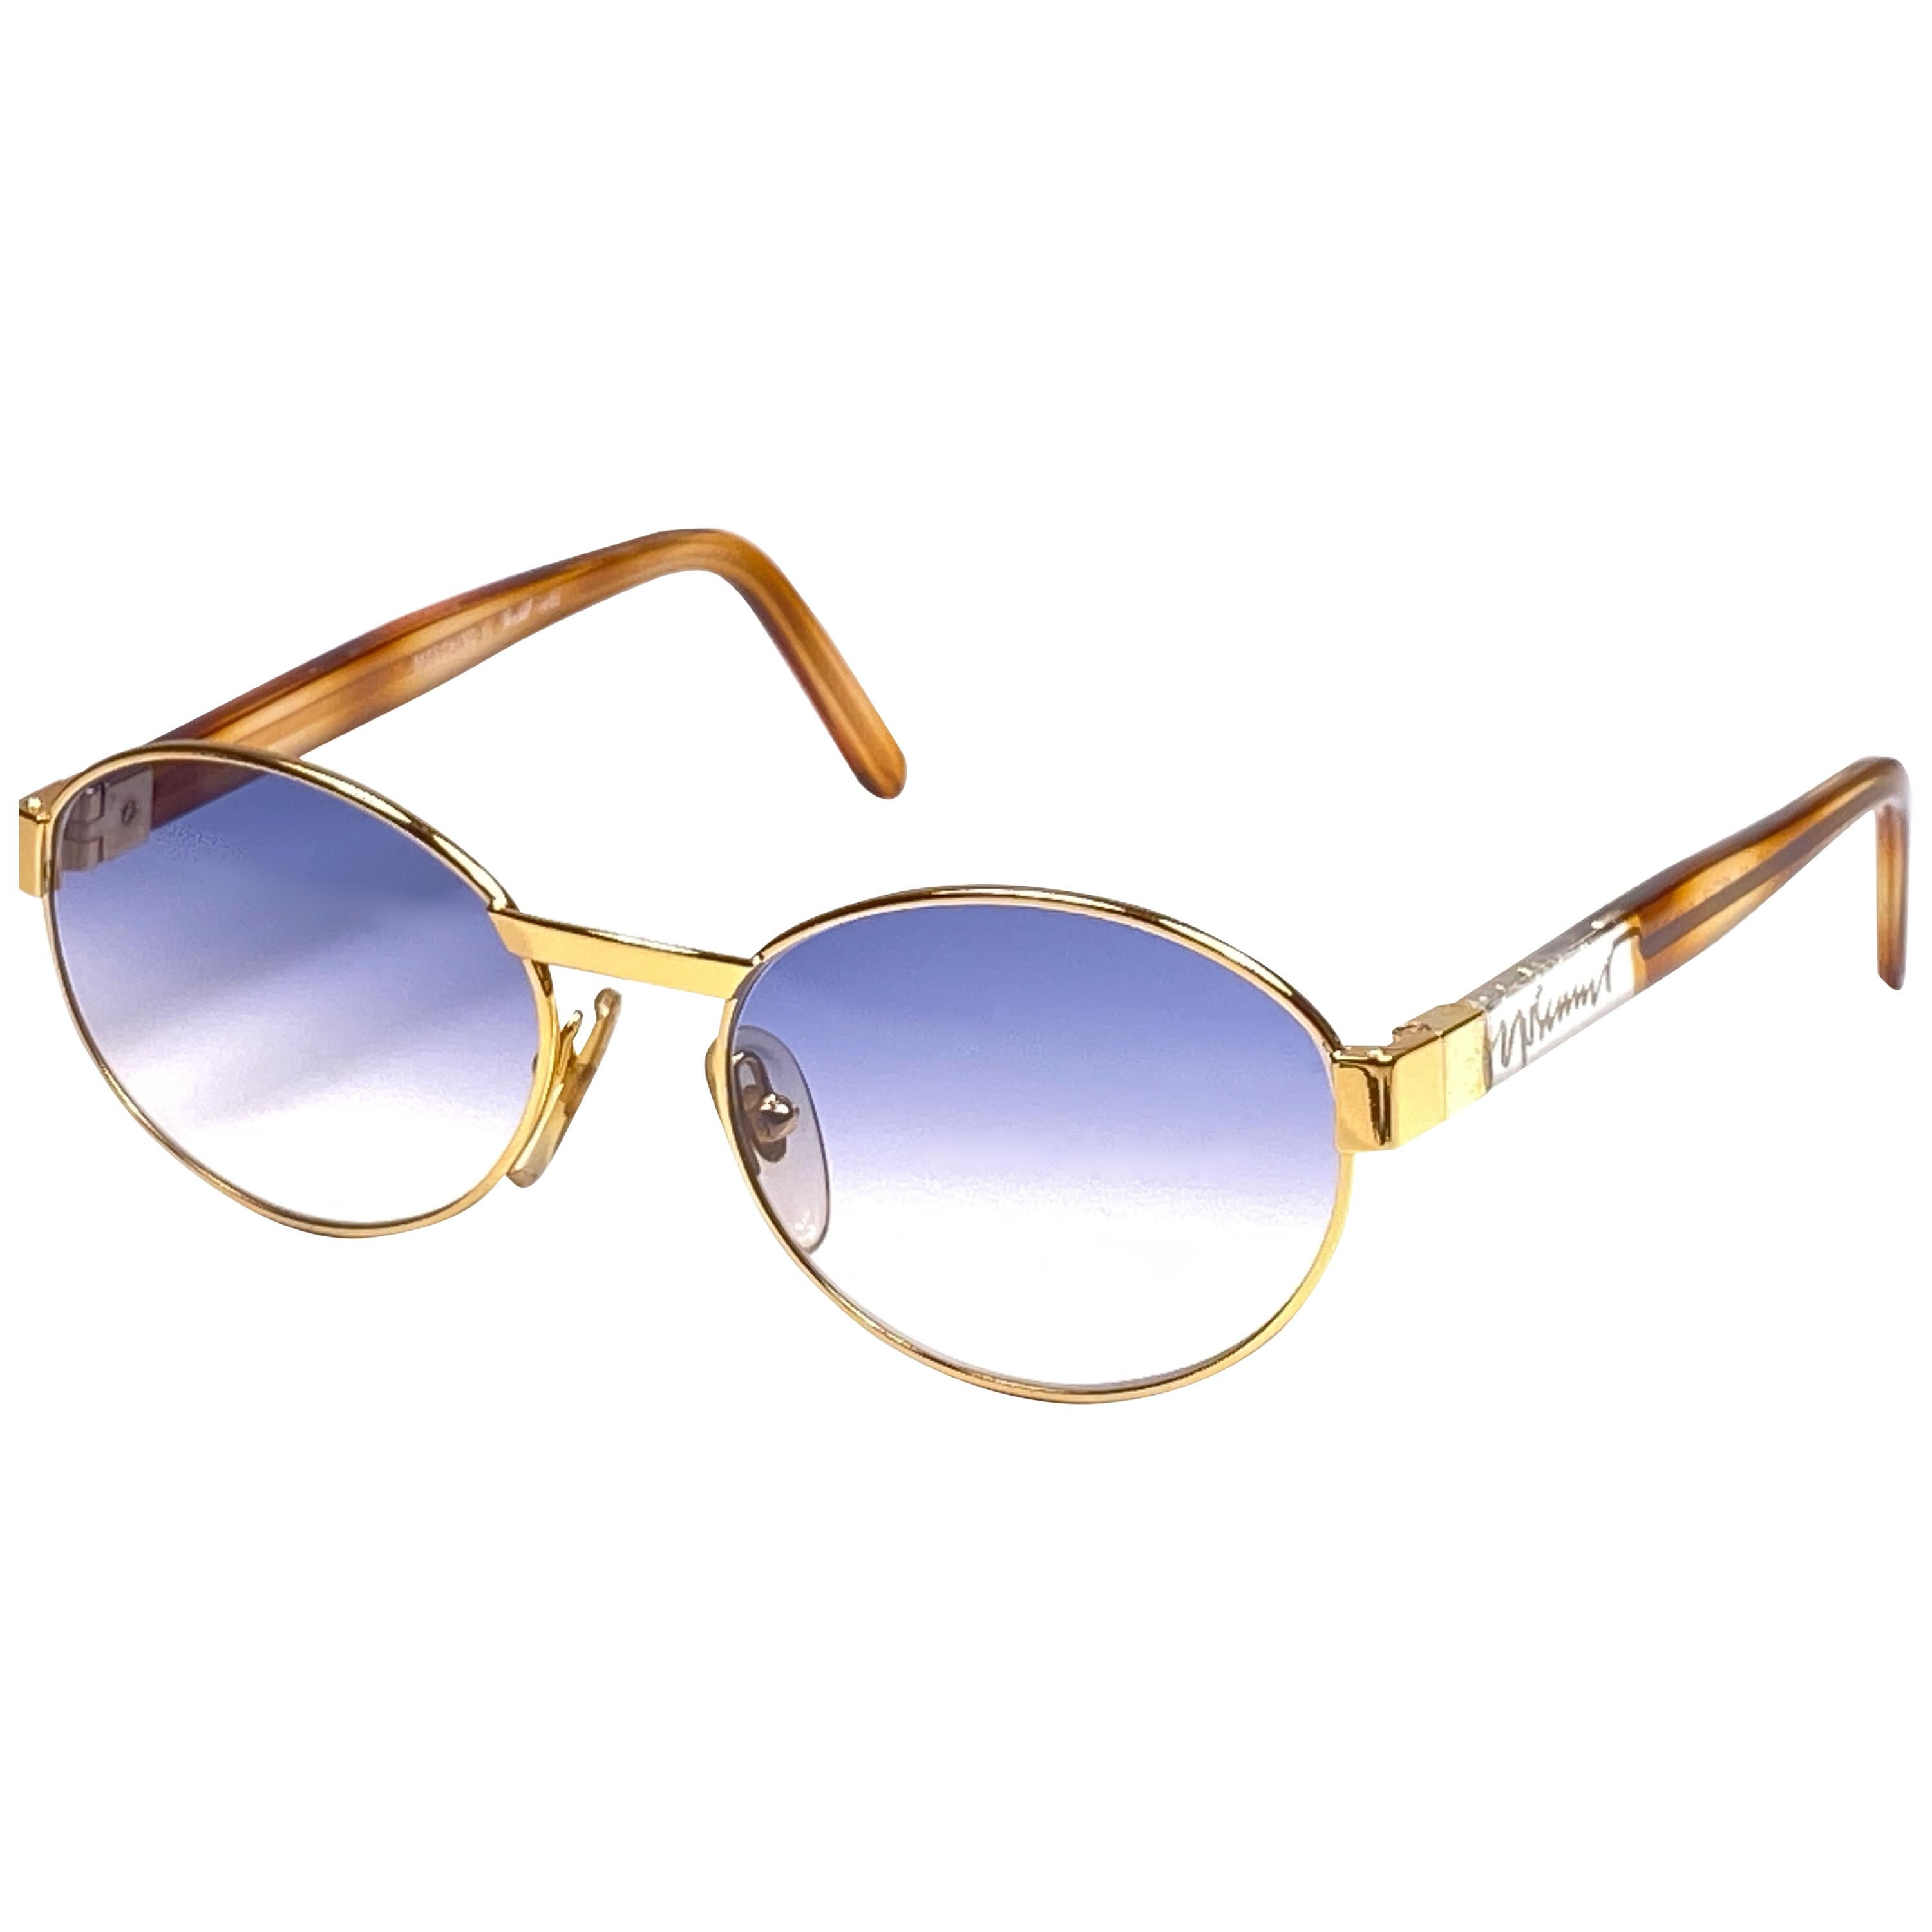 New Vintage Moschino By Persol M32 Frame Medium Oval Gold Sunglasses 